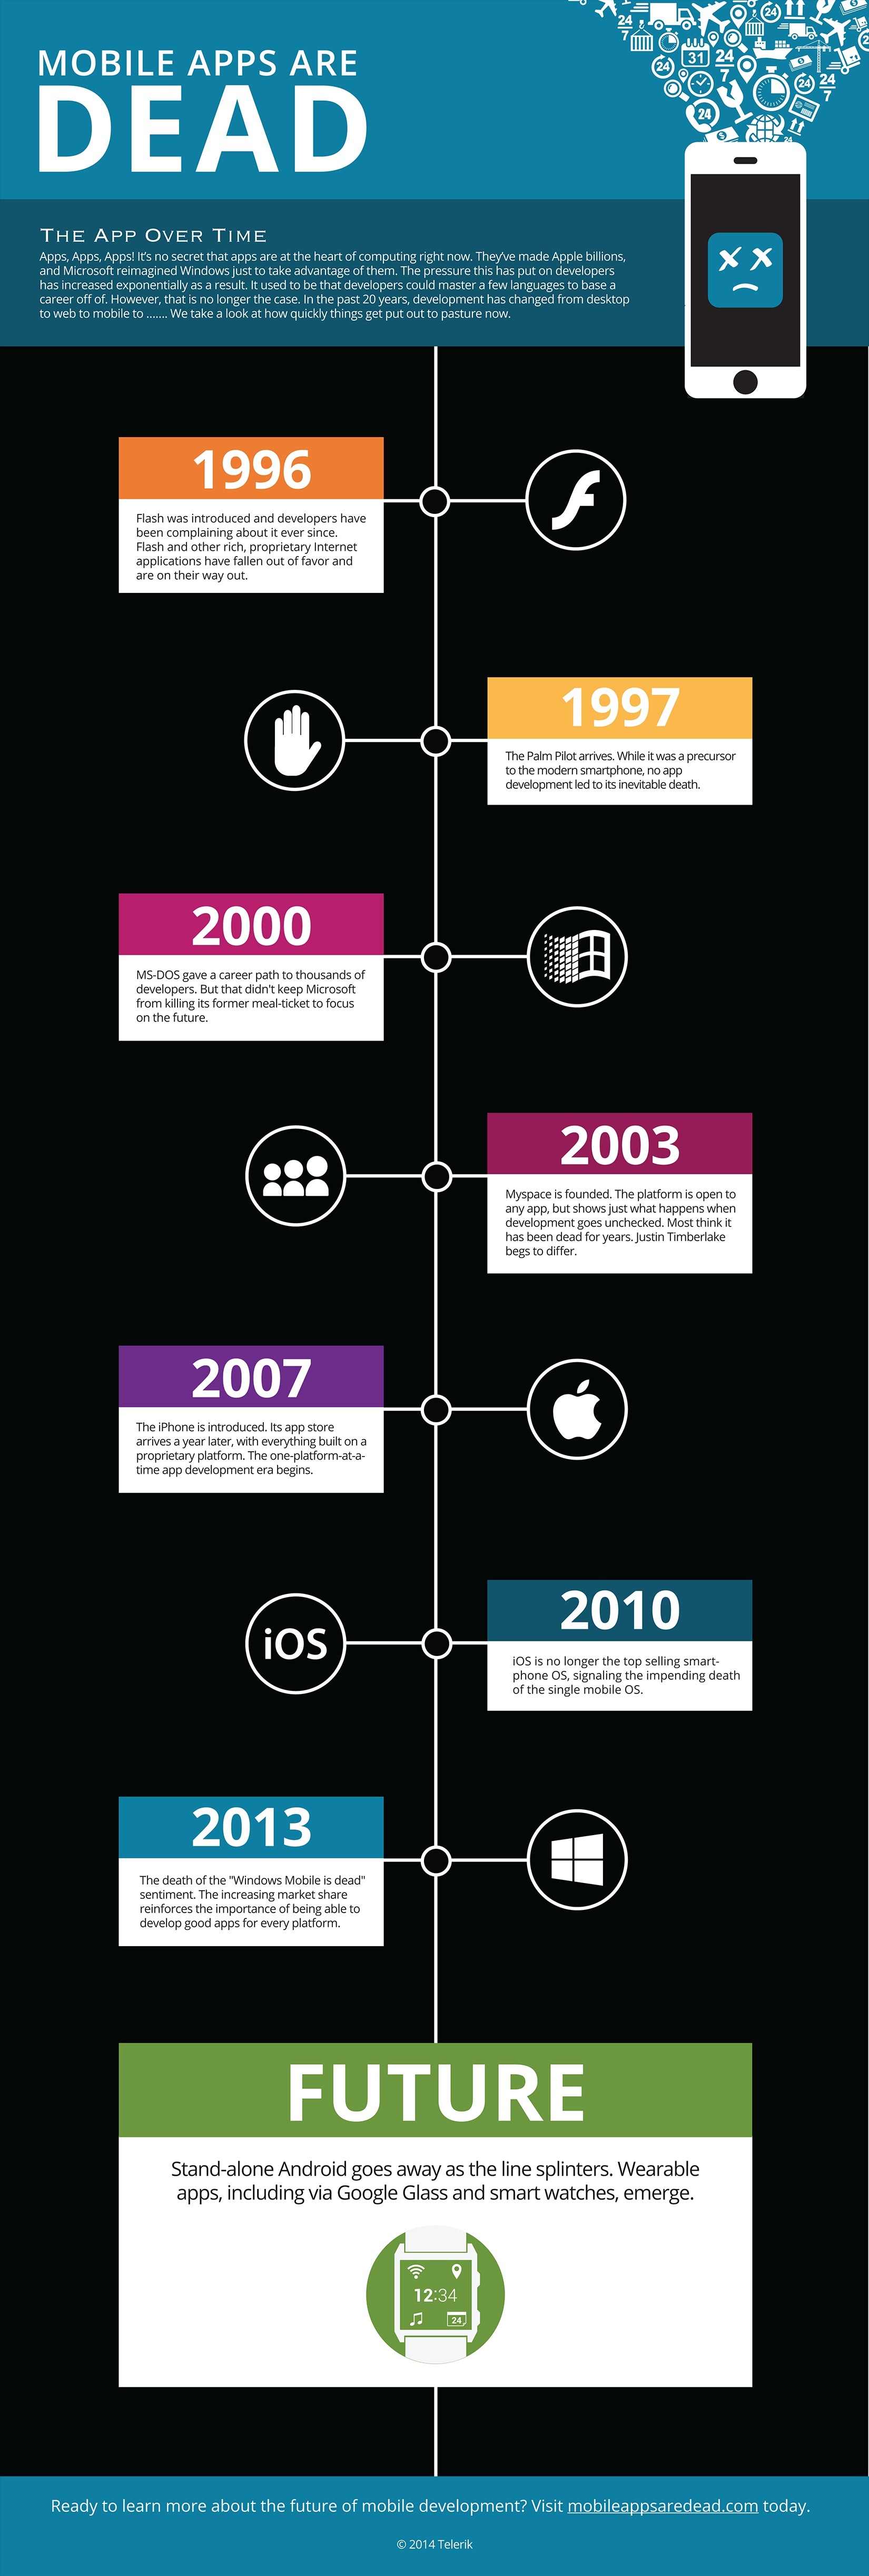 Mobile Apps Are Dead Infographic